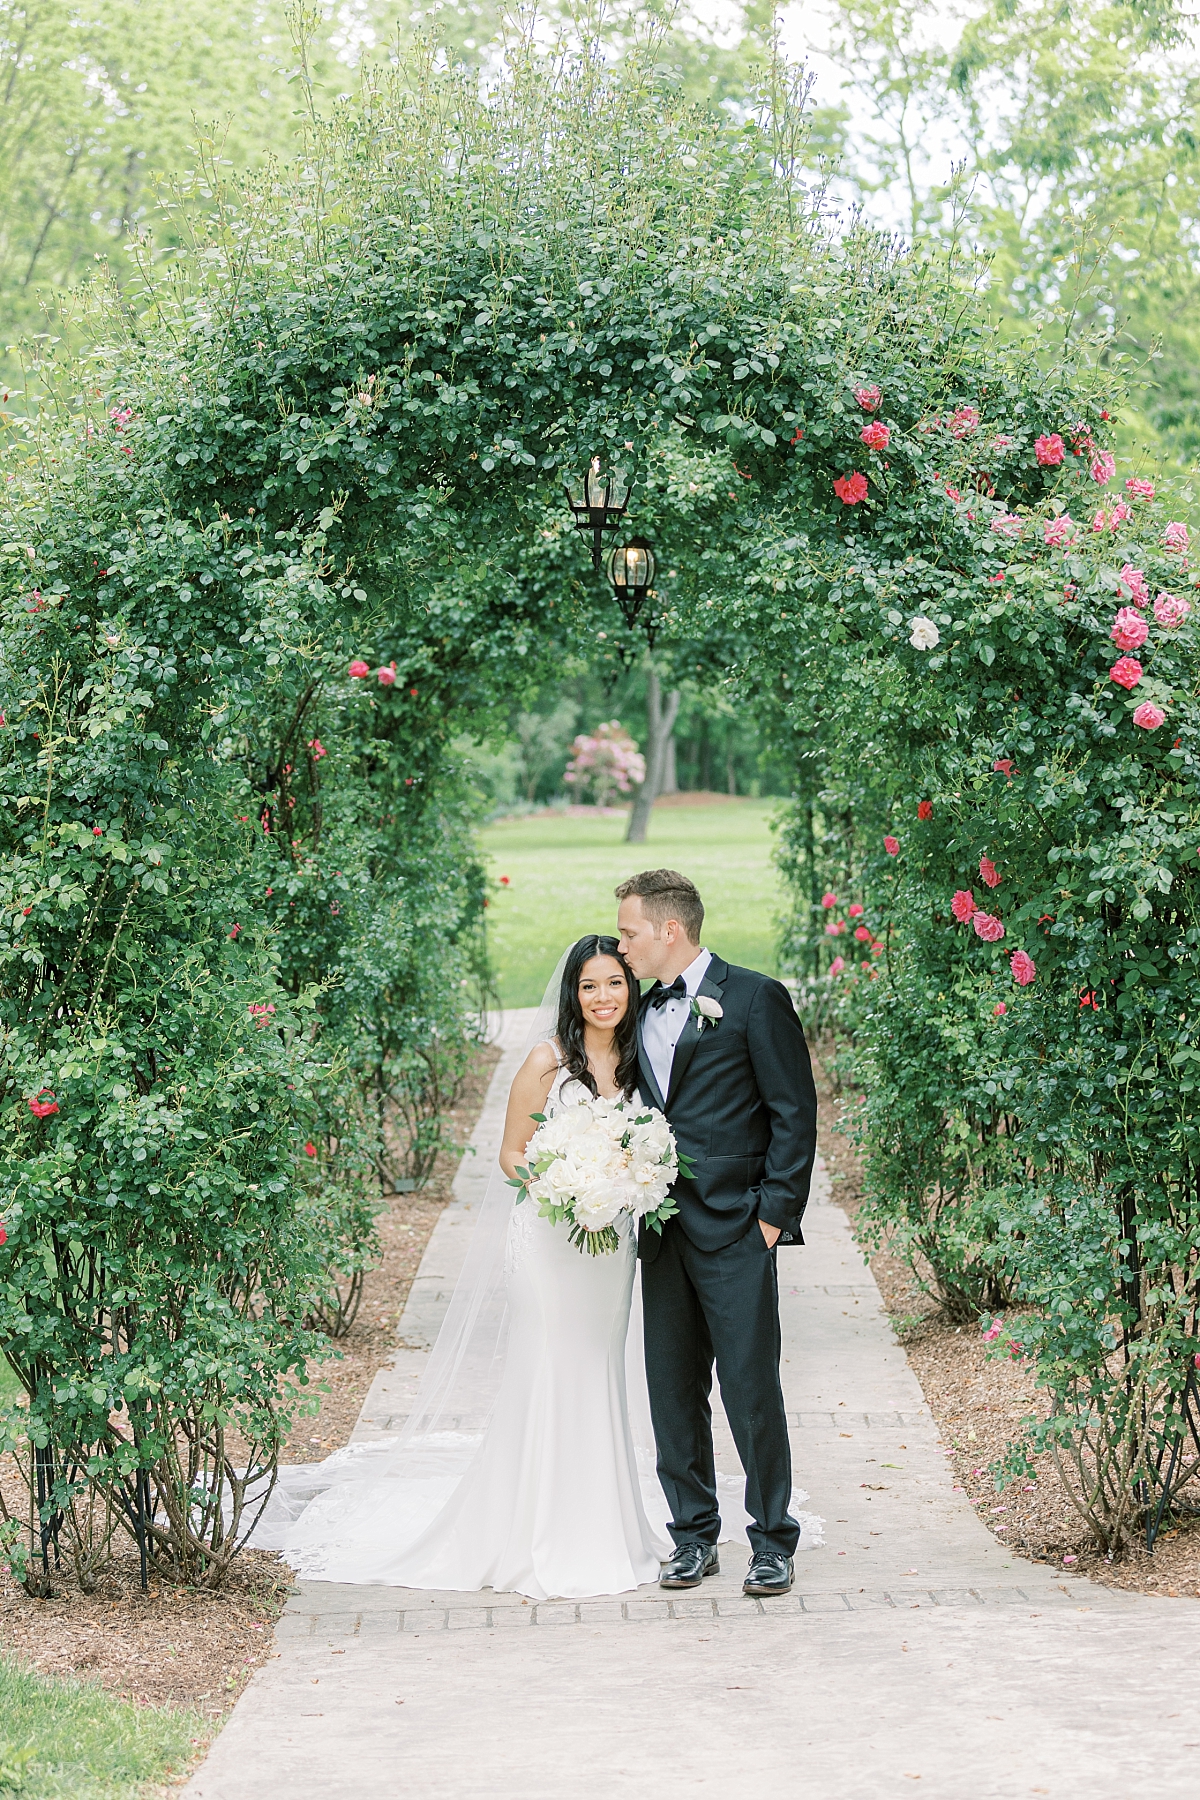 Moonstone Manor rose arch for a bride and groom